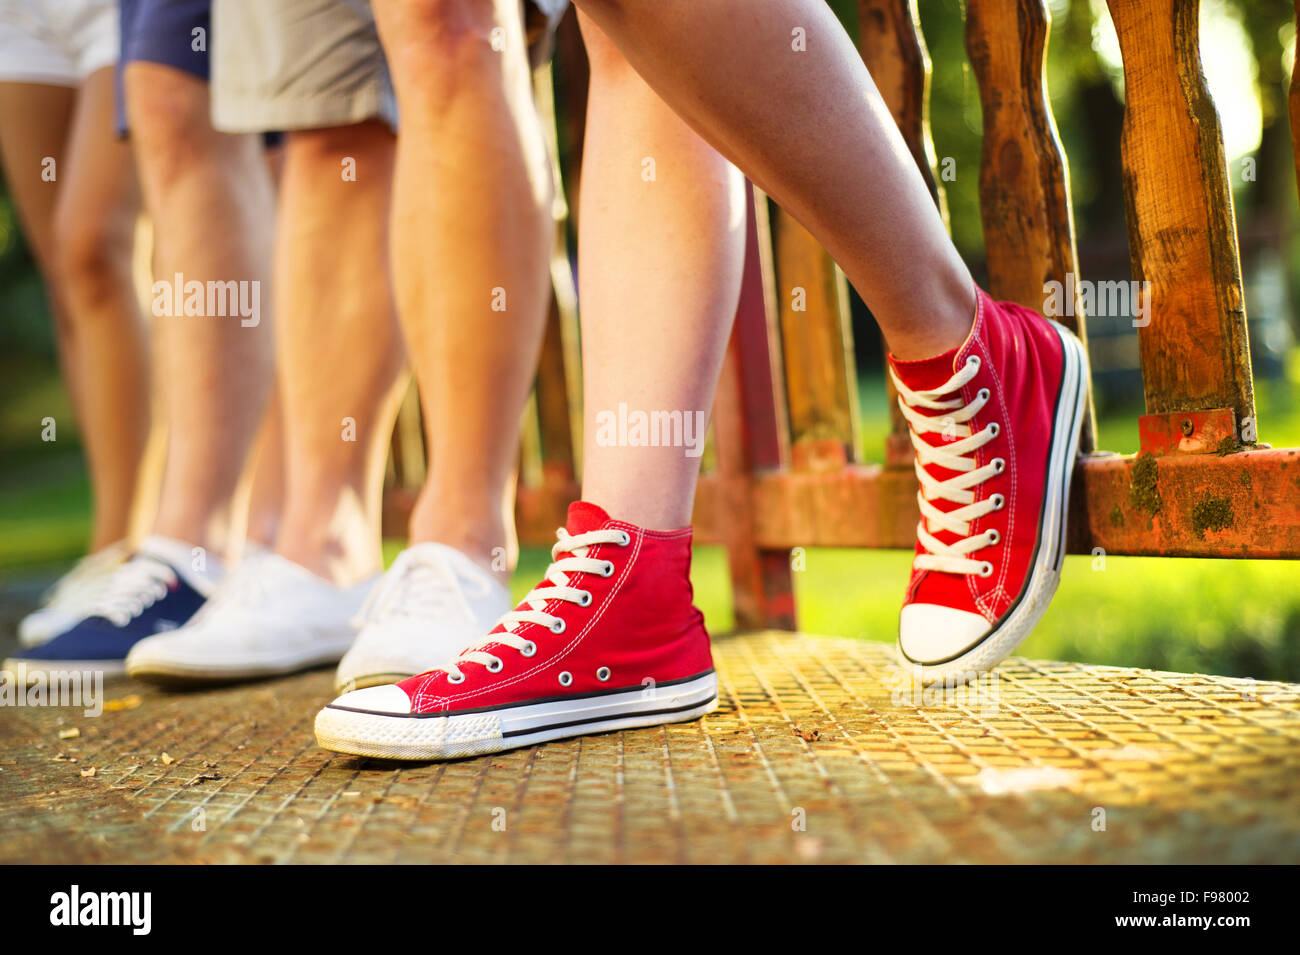 Legs and sneakers of teenage boys and girls standing on the sidewalk Stock Photo